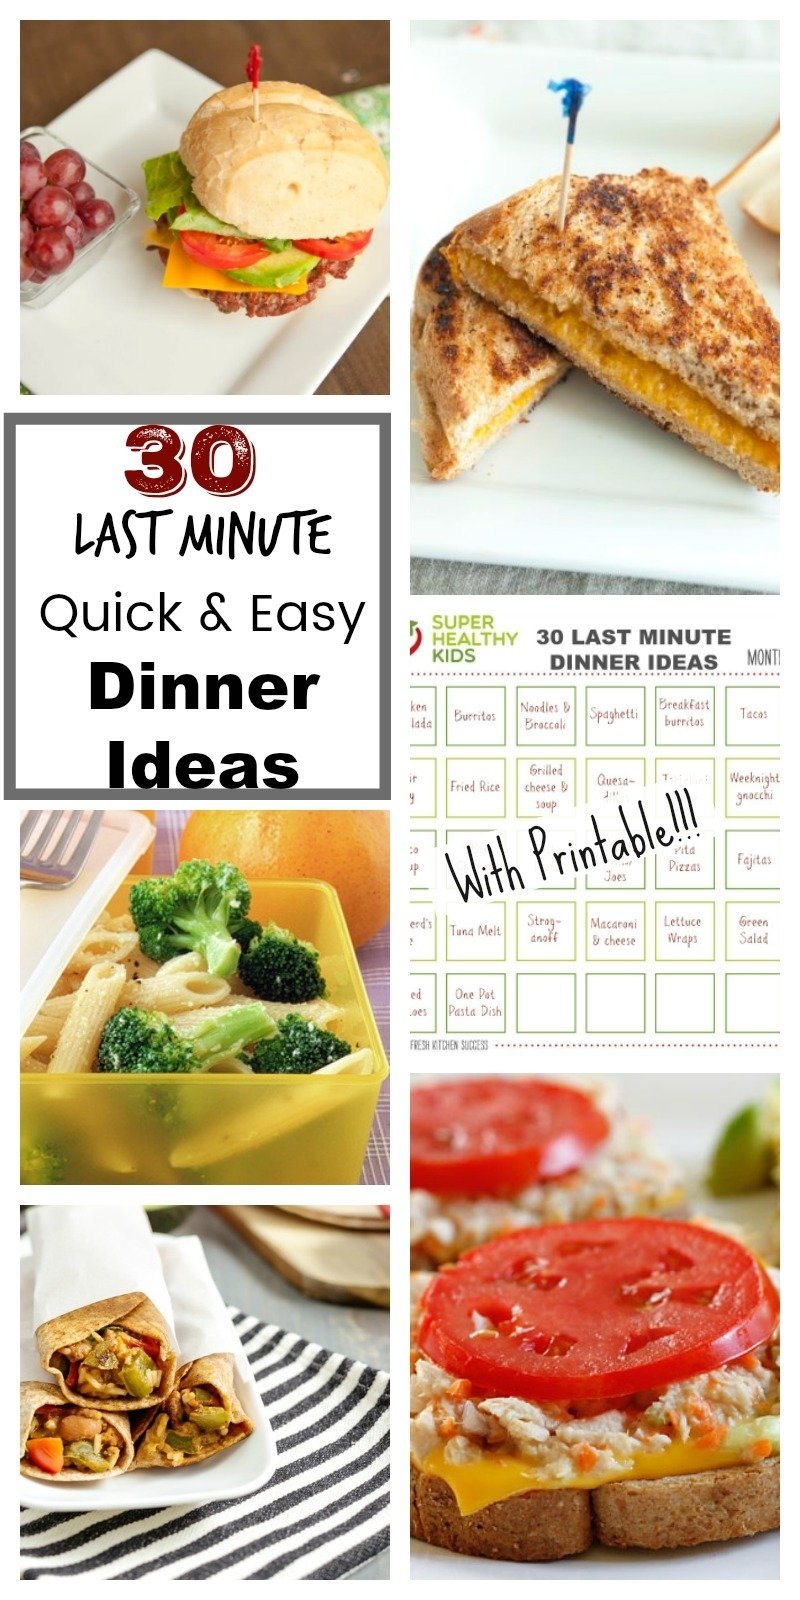 10 Unique Easy Lunch Ideas For Guests 30 quick and easy last minute dinner ideas healthy ideas for kids 2022